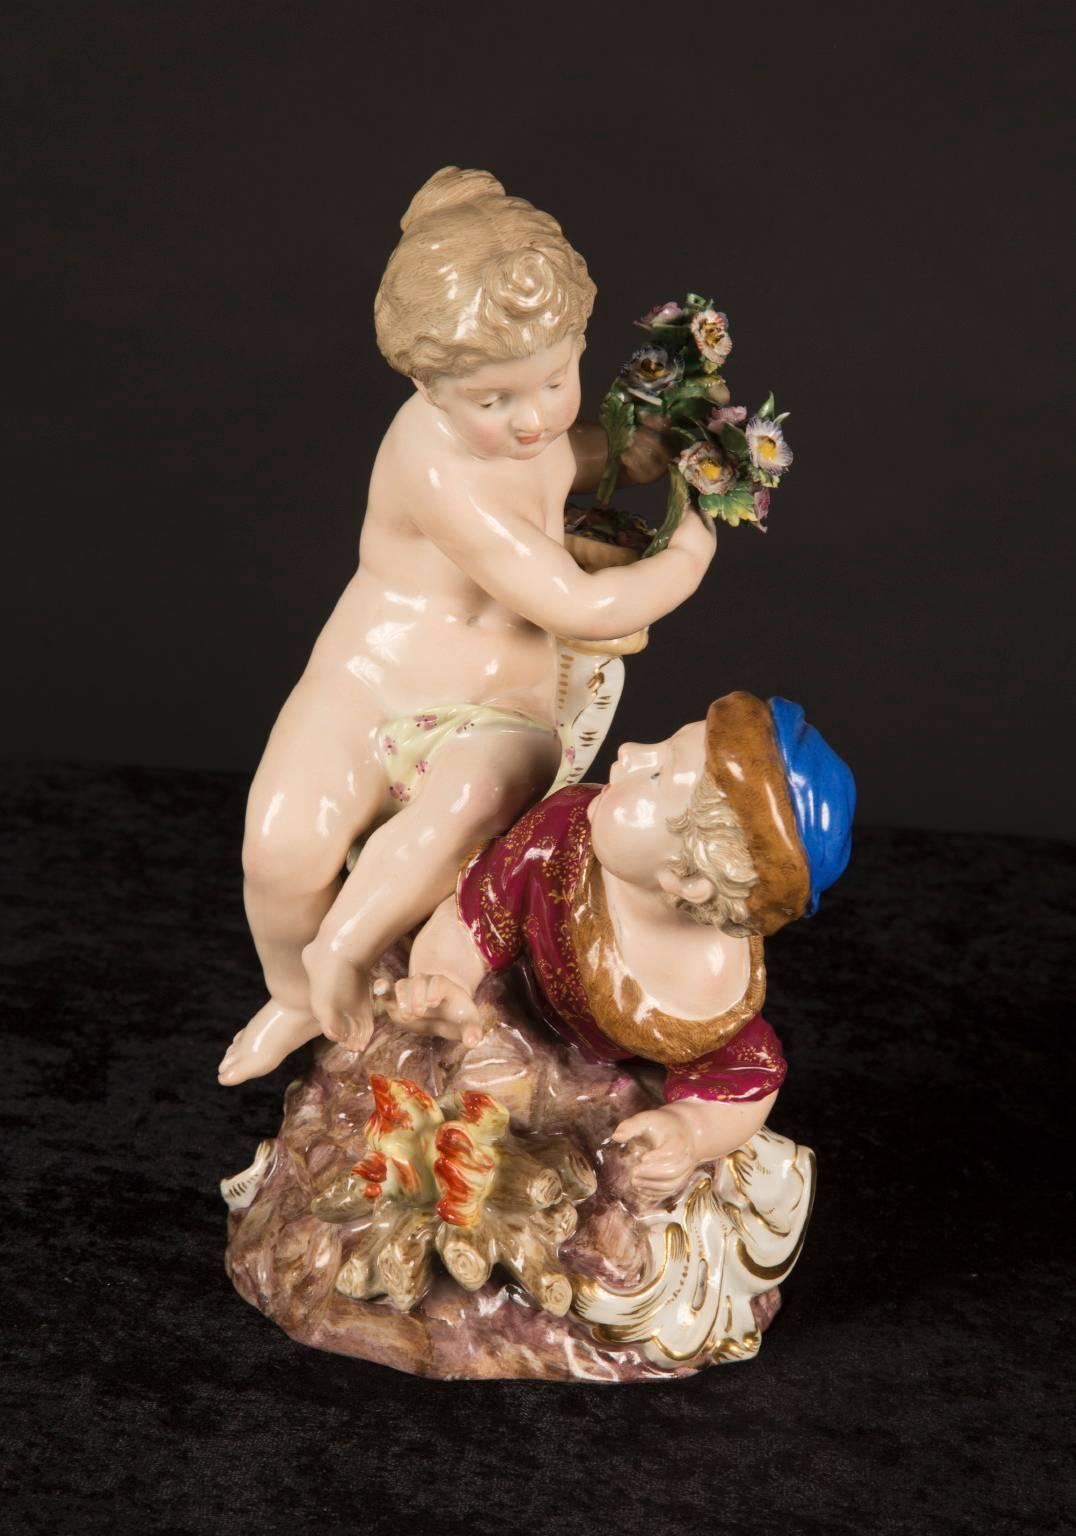 This pair of Meissen figurines depicts four infants, each representative of one of the Four Seasons. Autumn and summer are paired together, with Summer draped in a purple cloth, holding a bunch of grapes. Autumn rests with a bushel of wheat in the